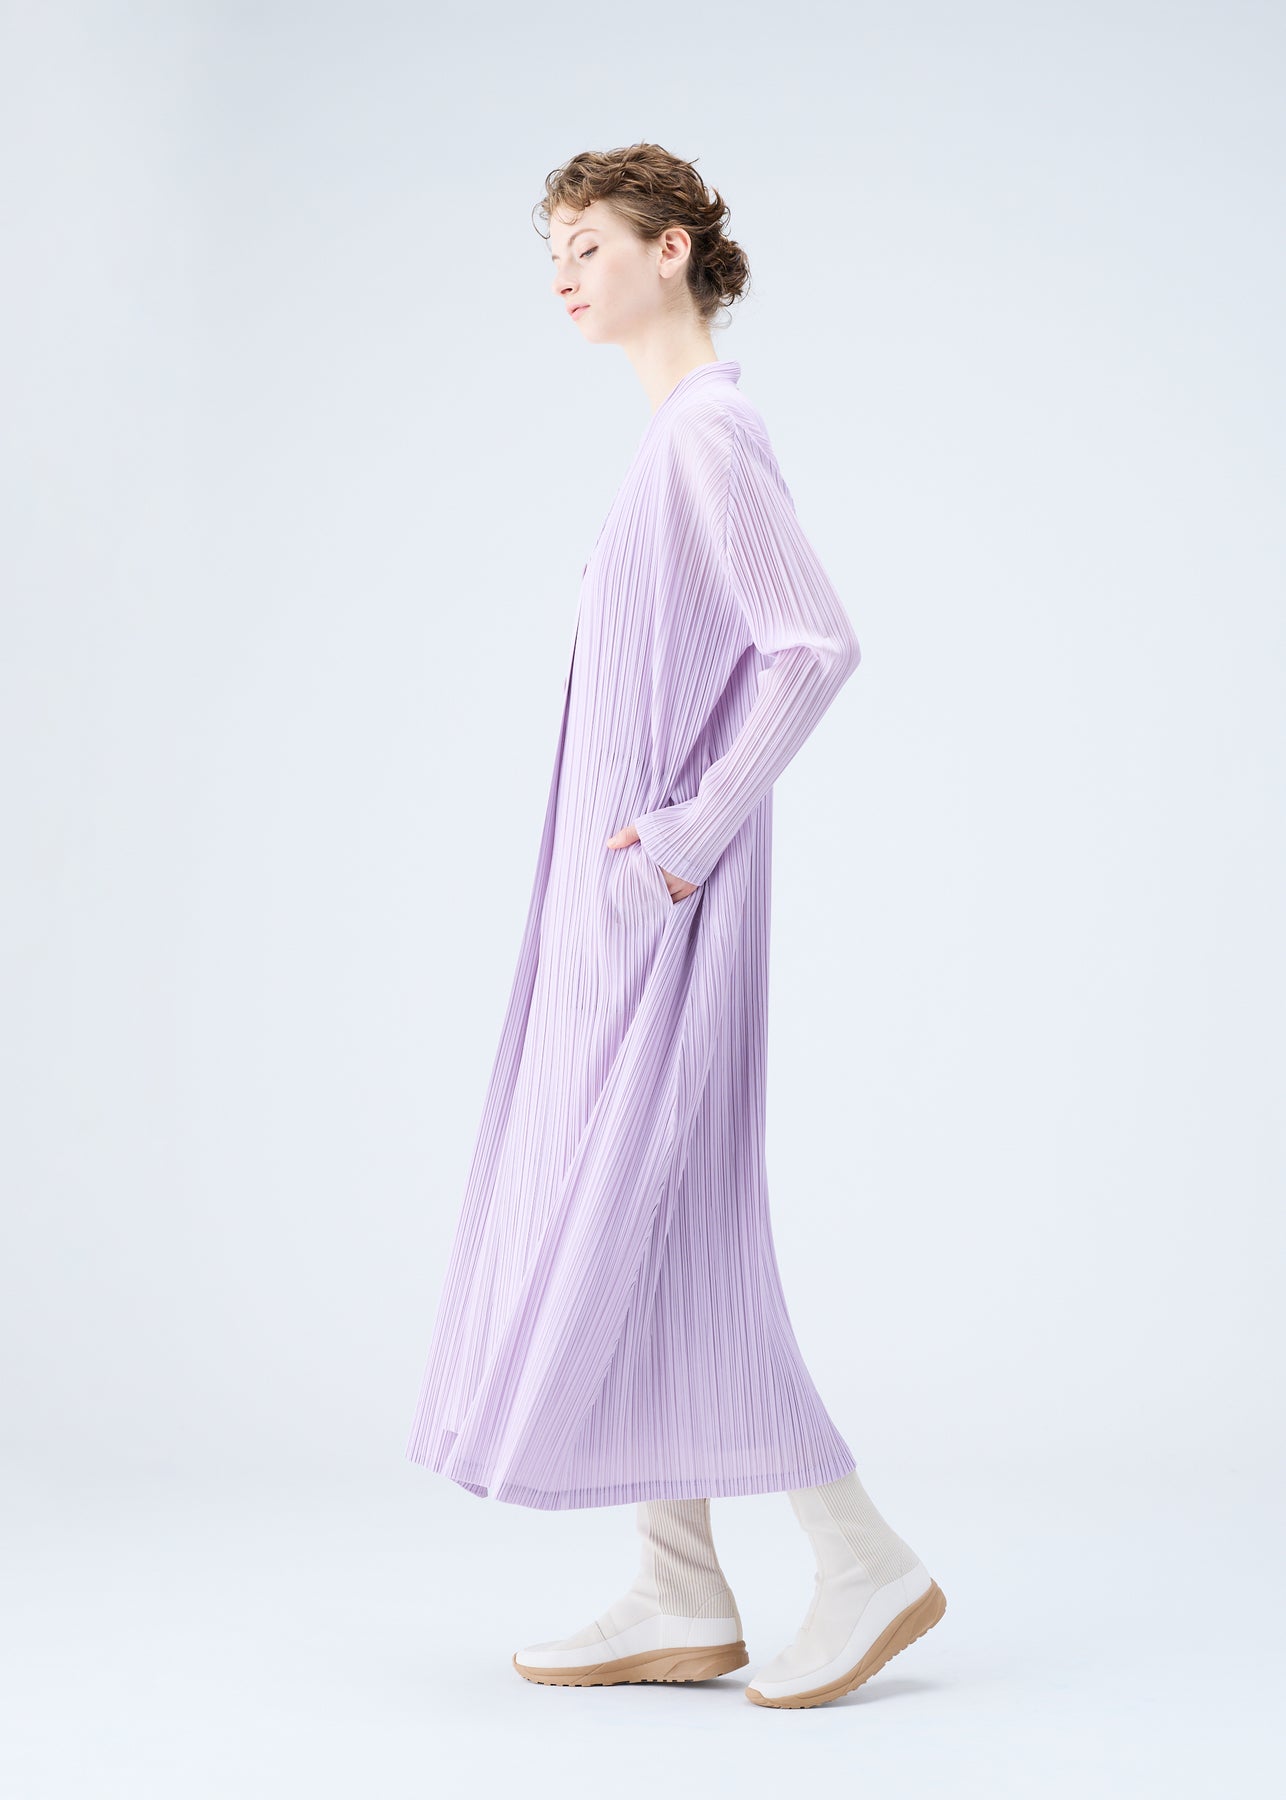 MONTHLY COLORS : DECEMBER COAT | The official ISSEY MIYAKE ONLINE